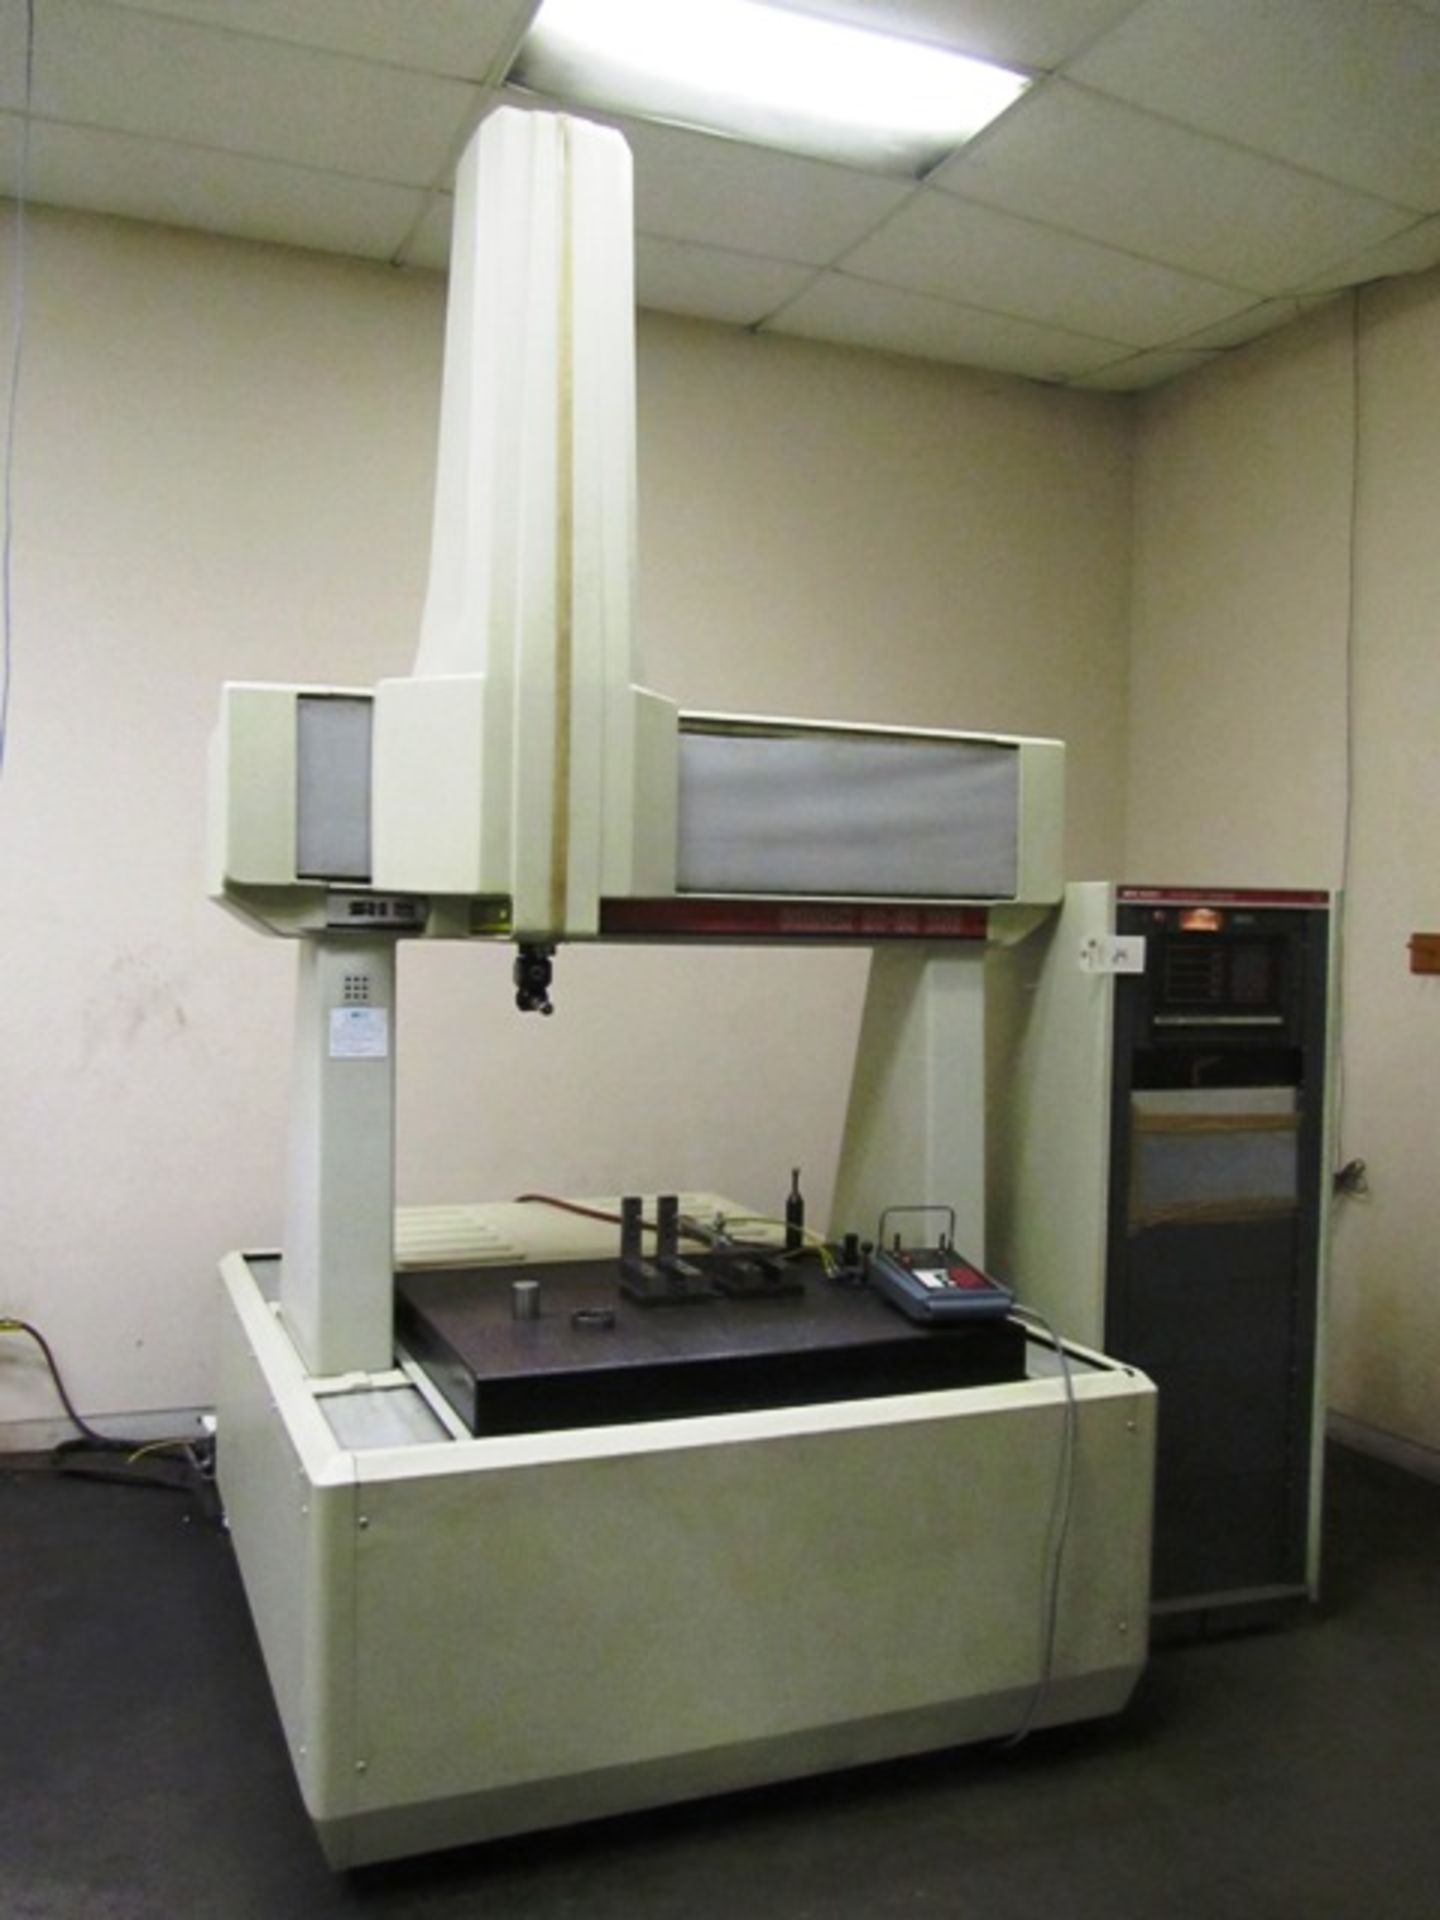 Sheffield Cordax RS-30 DCC Coordinate Measuring Machine with Joystick Control, 32'' x 42'' Work